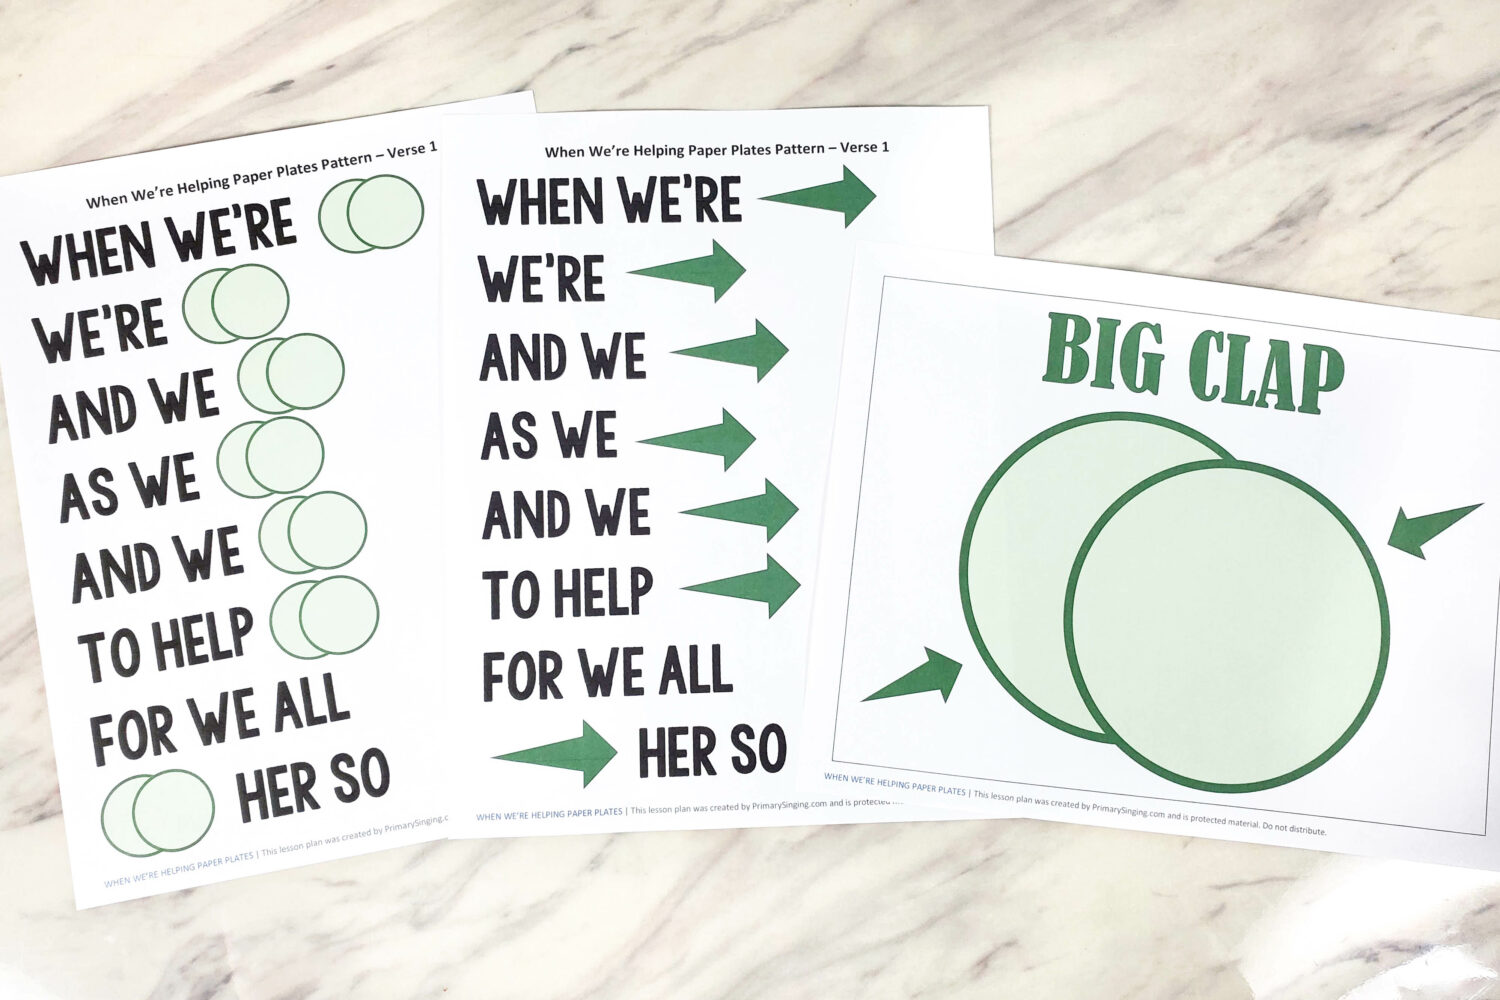 When We're Helping Paper Plates singing time activity to add in purposeful movement and some rhythm clapping on the main keywords plus more ways to play! Includes a printable pattern chart for LDS Primary music leaders.